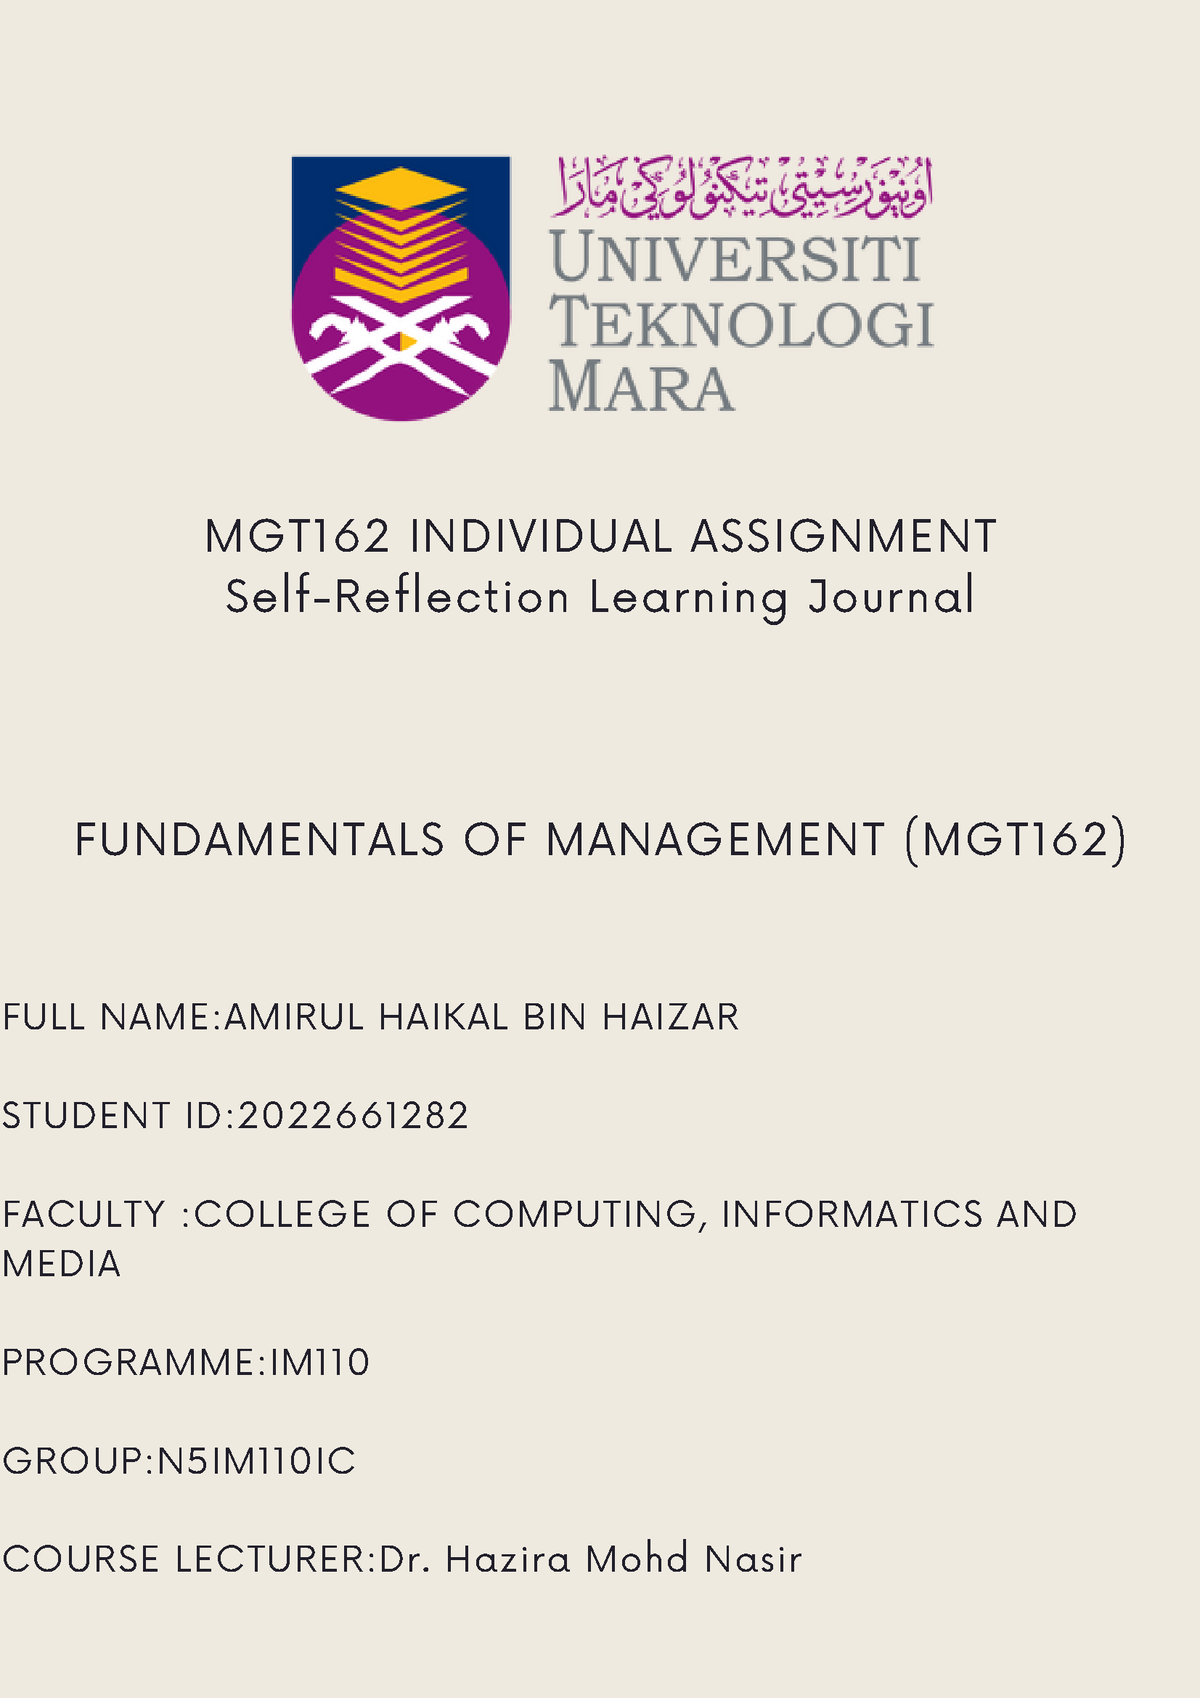 mgt162 individual assignment self reflection